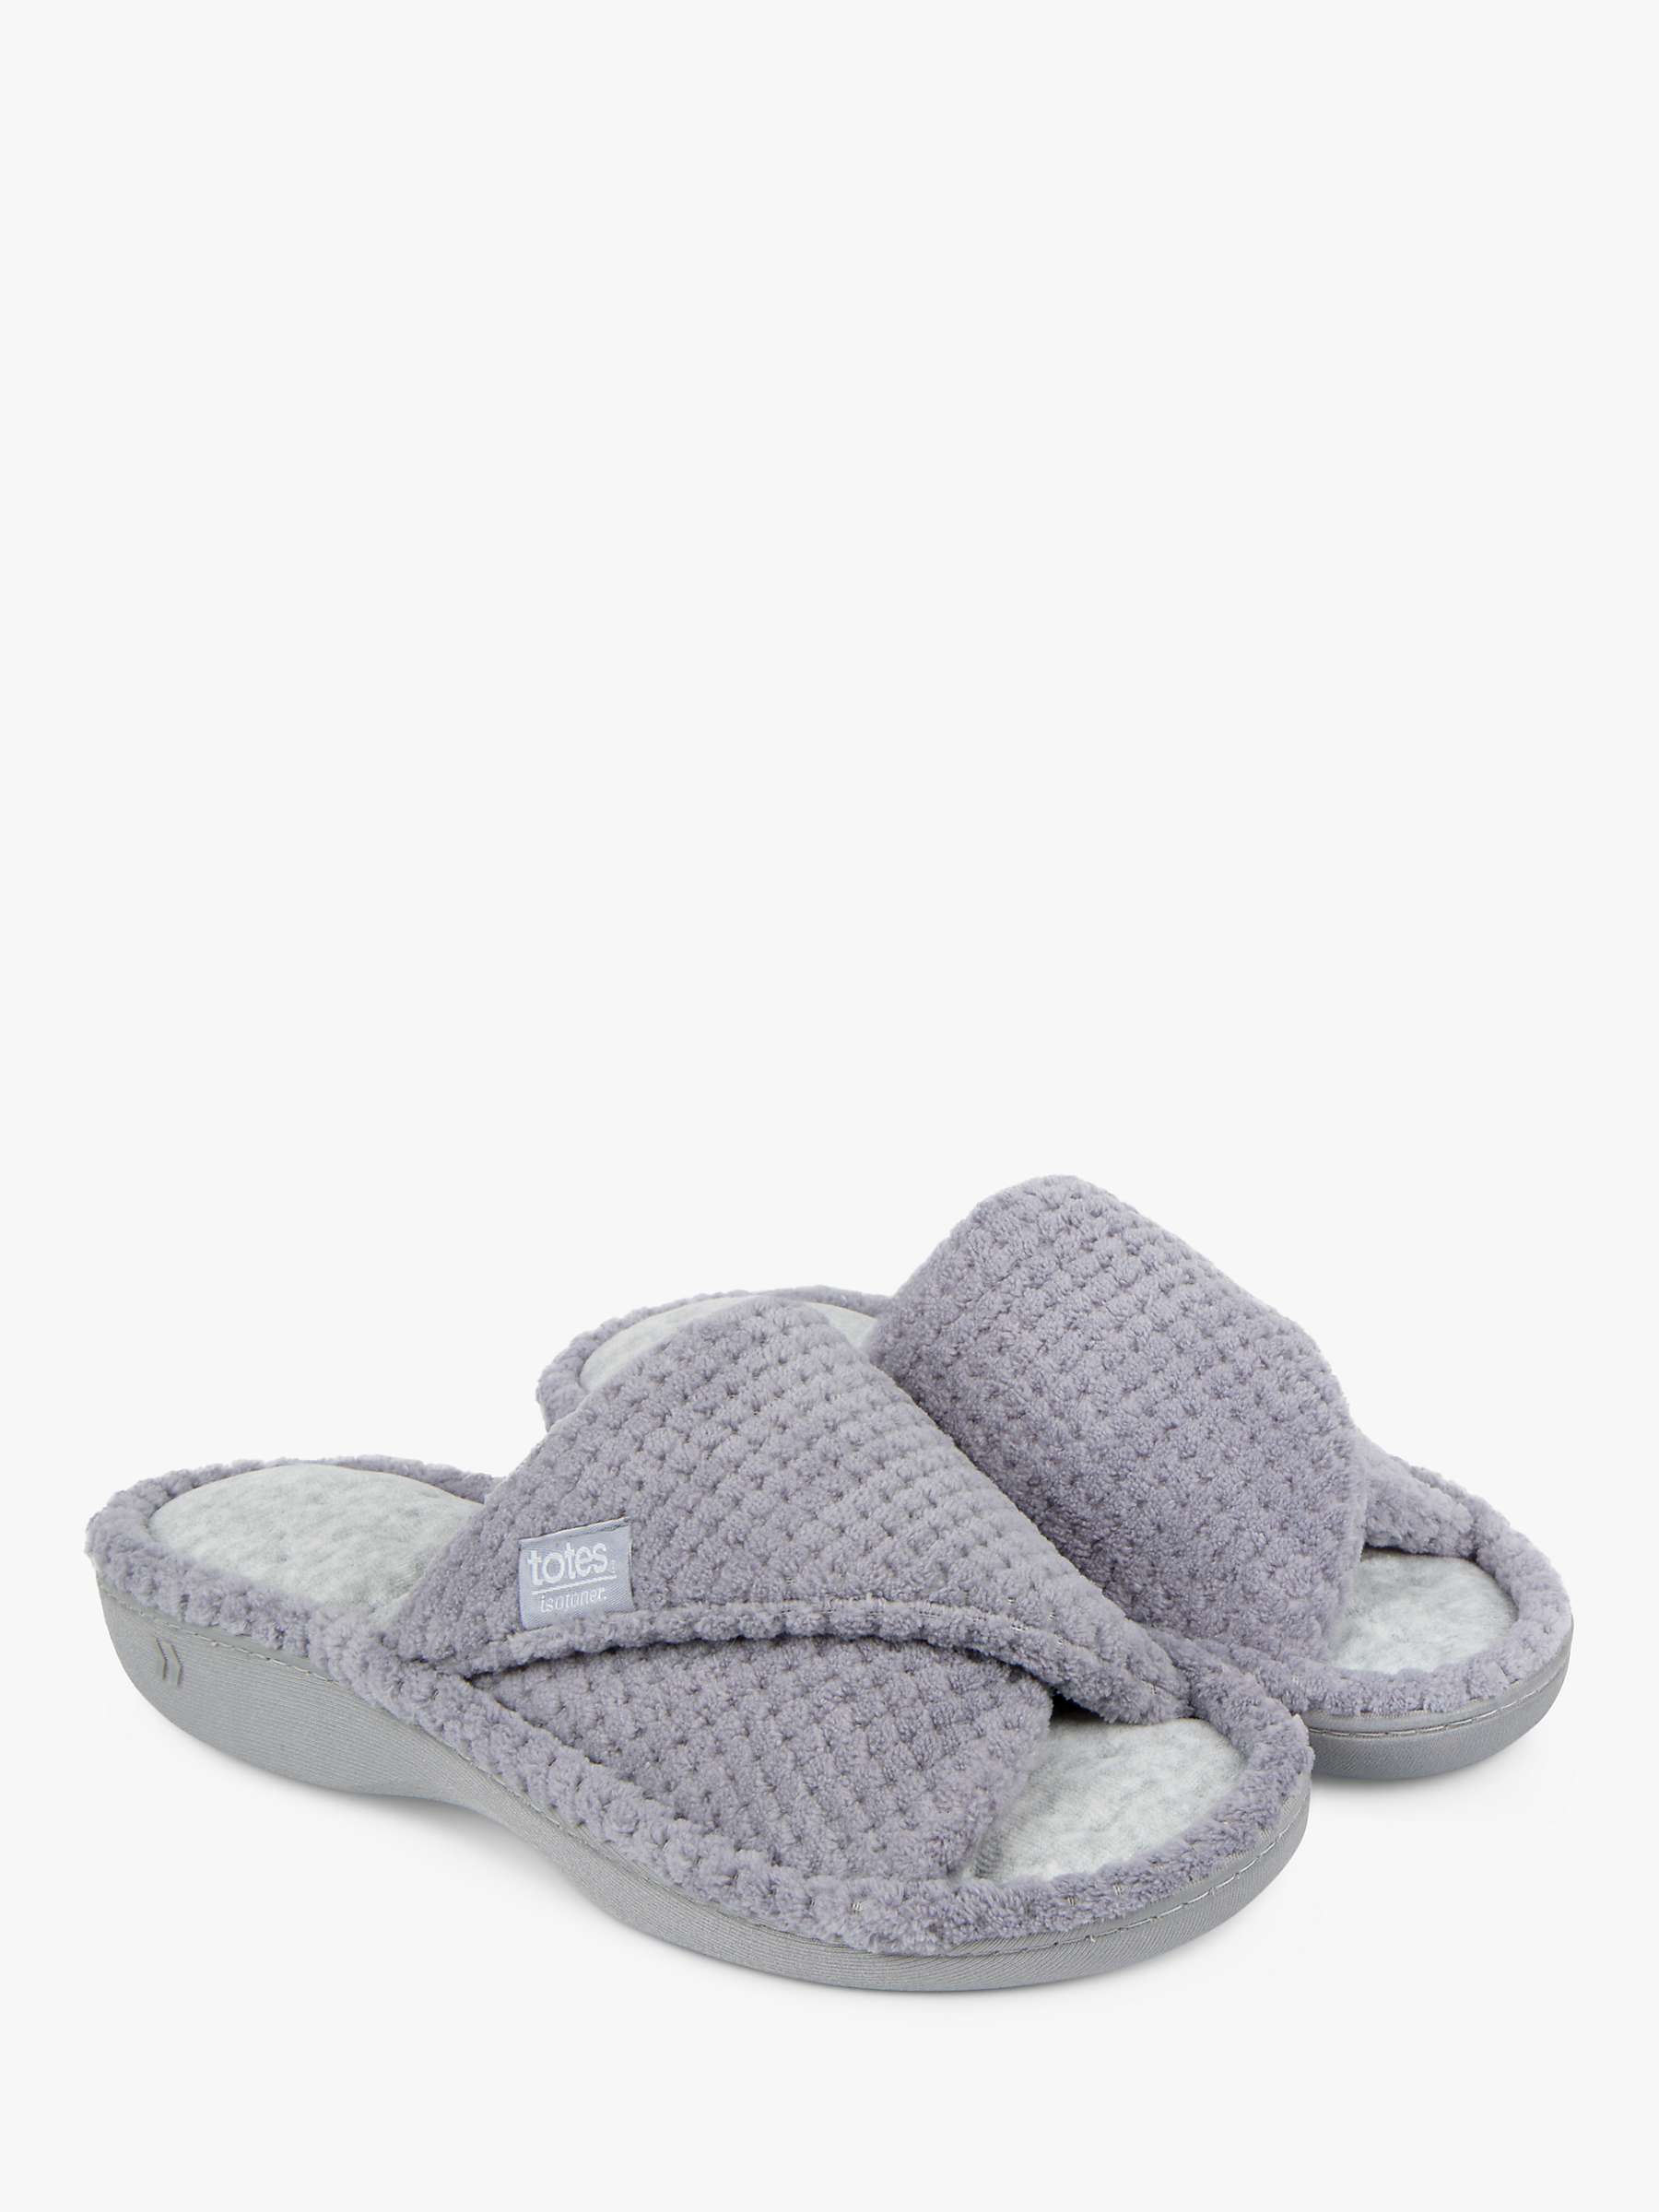 Buy totes Textured Popcorn Turnover Mule Slippers Online at johnlewis.com